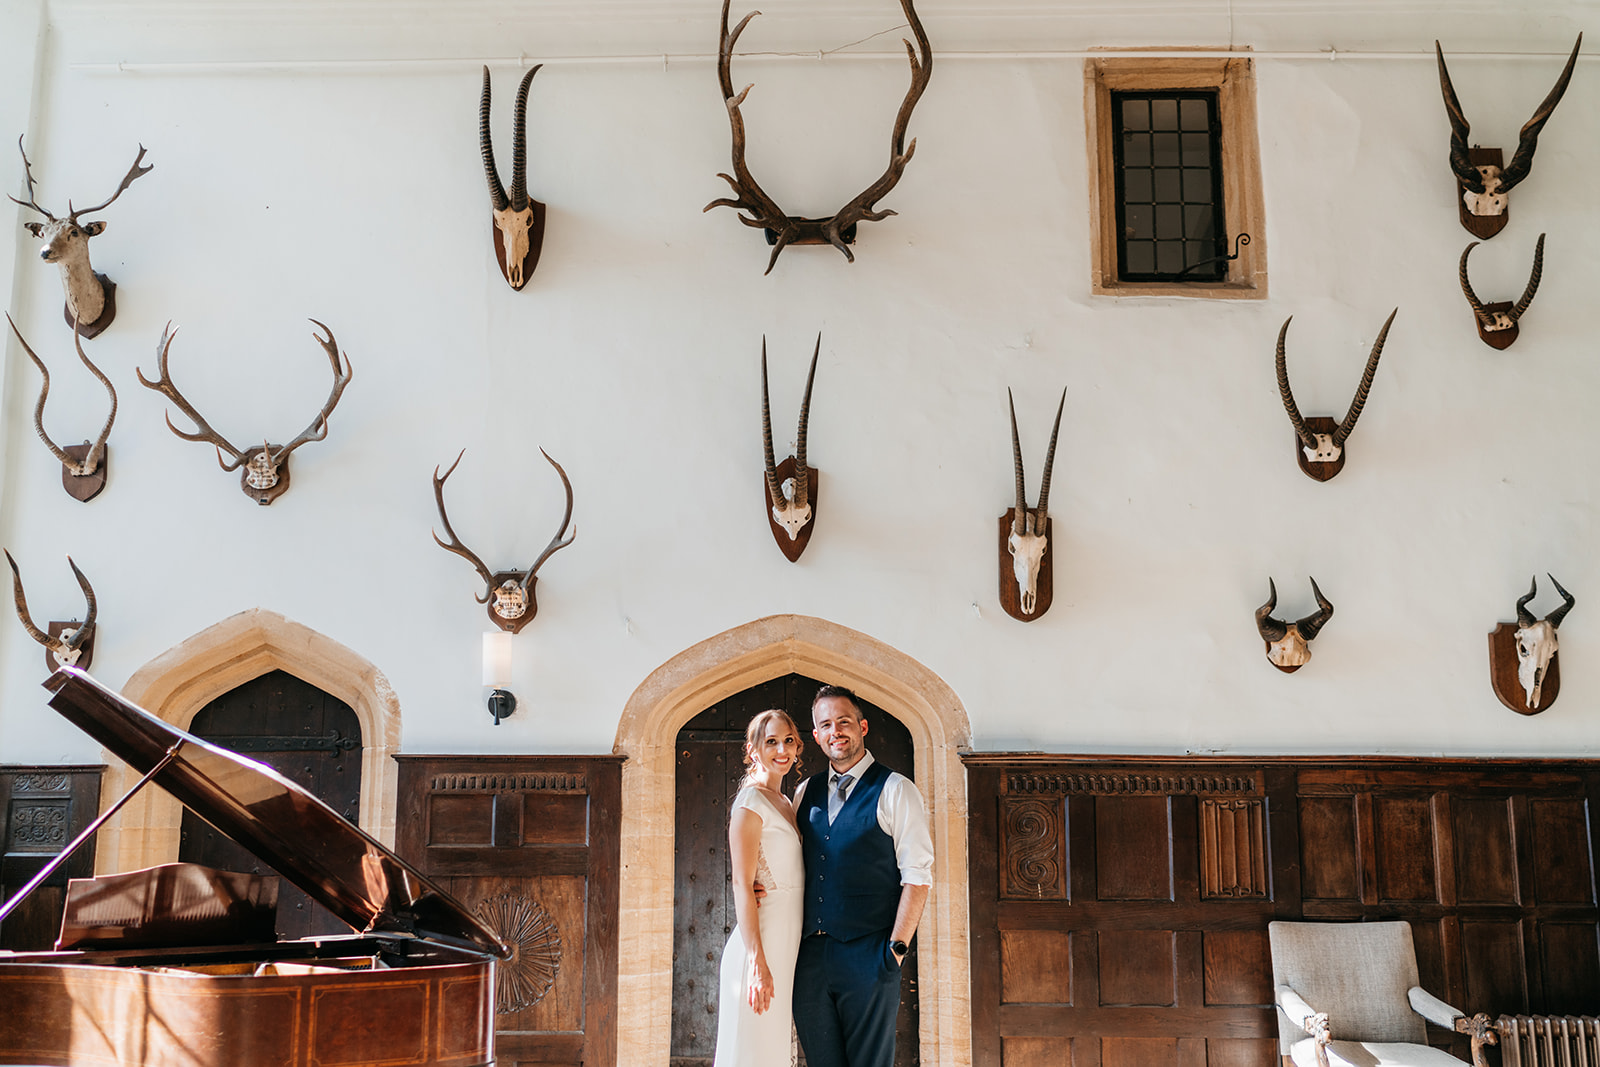 The bride and groom stood underneath the stag heads on the wall of the great hall